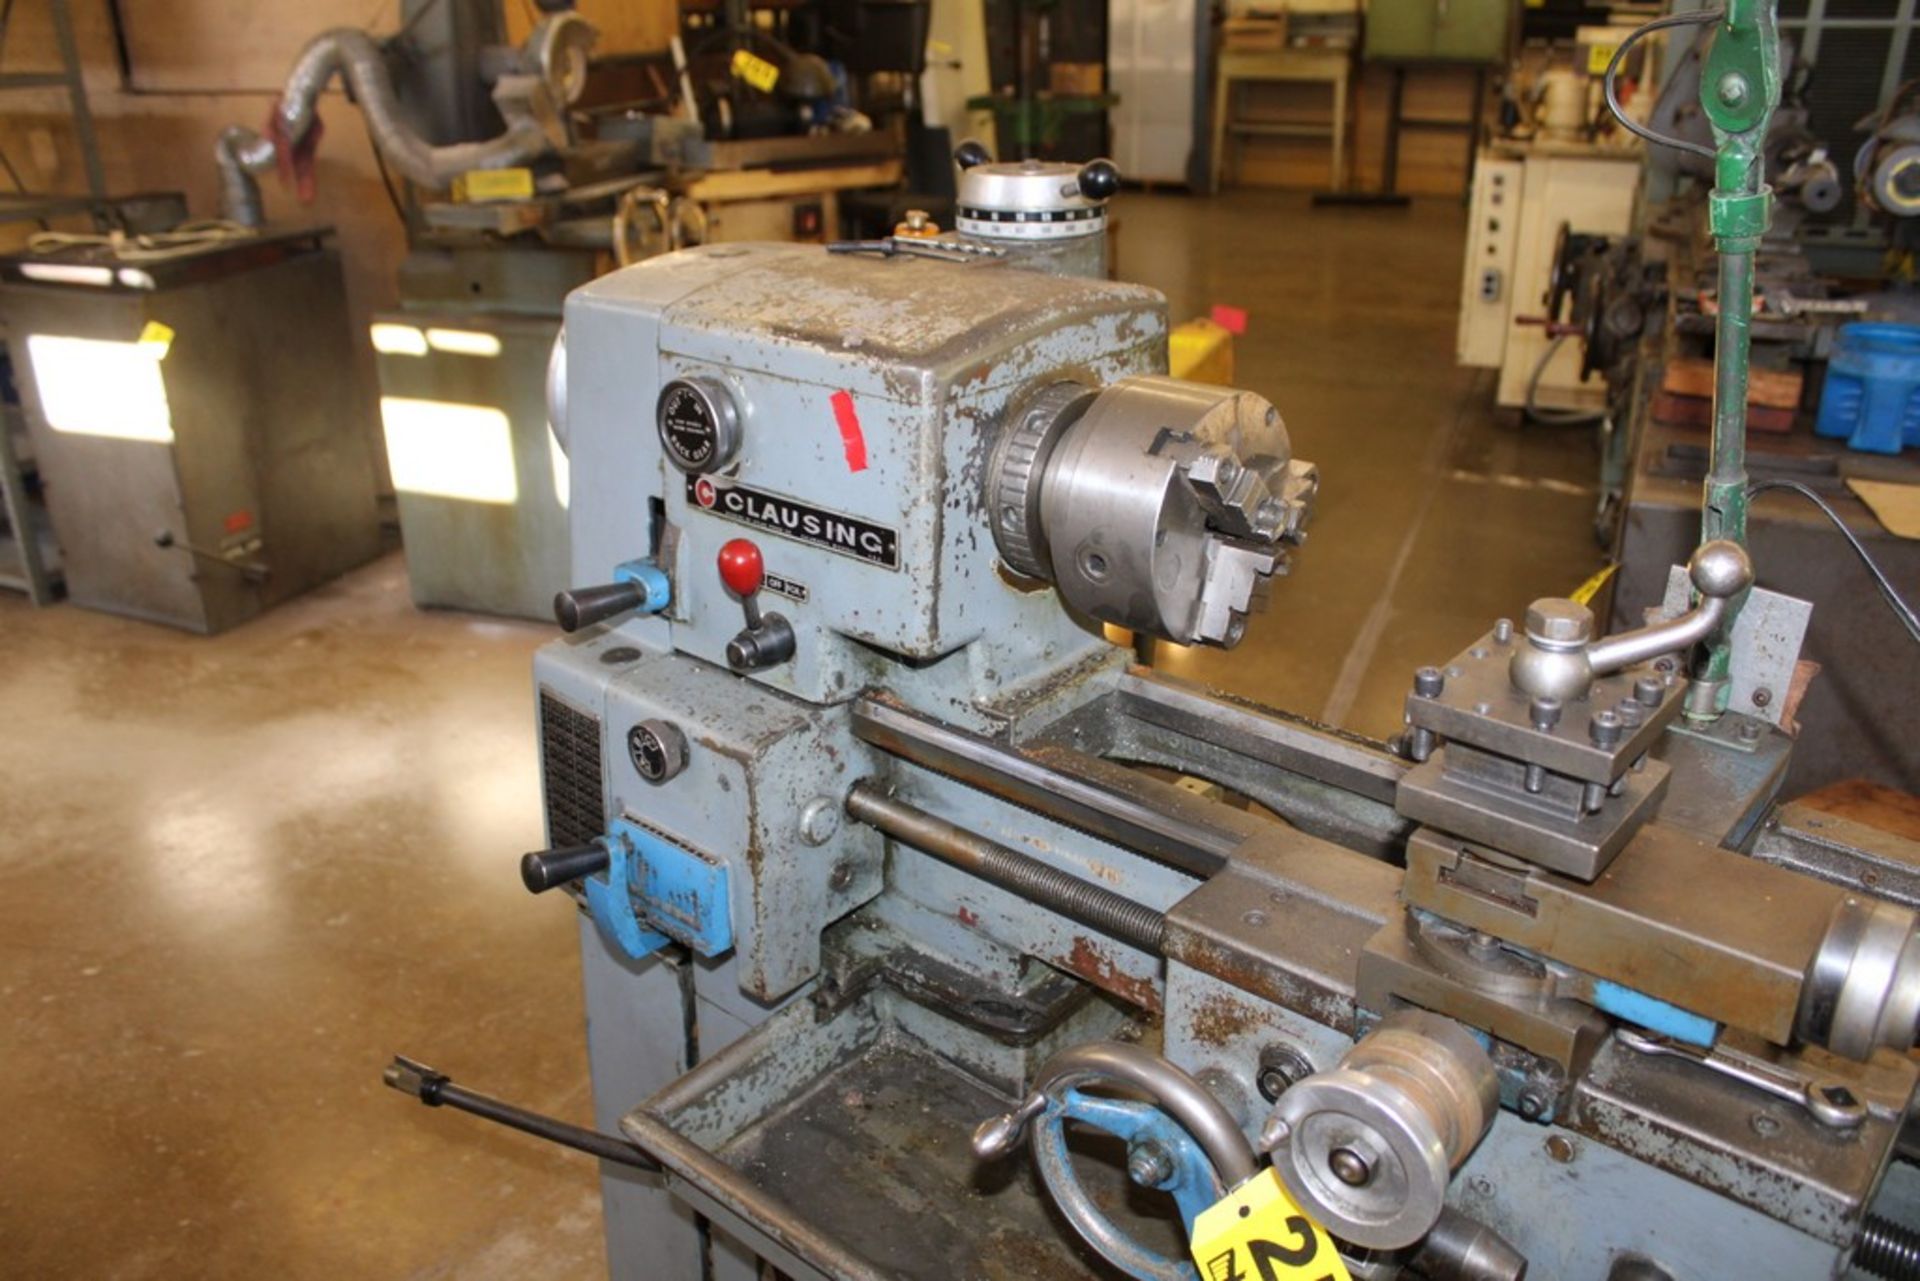 CLAUSING 12"X36" MODEL 5914 TOOLROOM LATHE, S/N 501411, 2,000 RPM SPINDLE, WITH 3-JAW CHUCK, INCH - Image 2 of 6